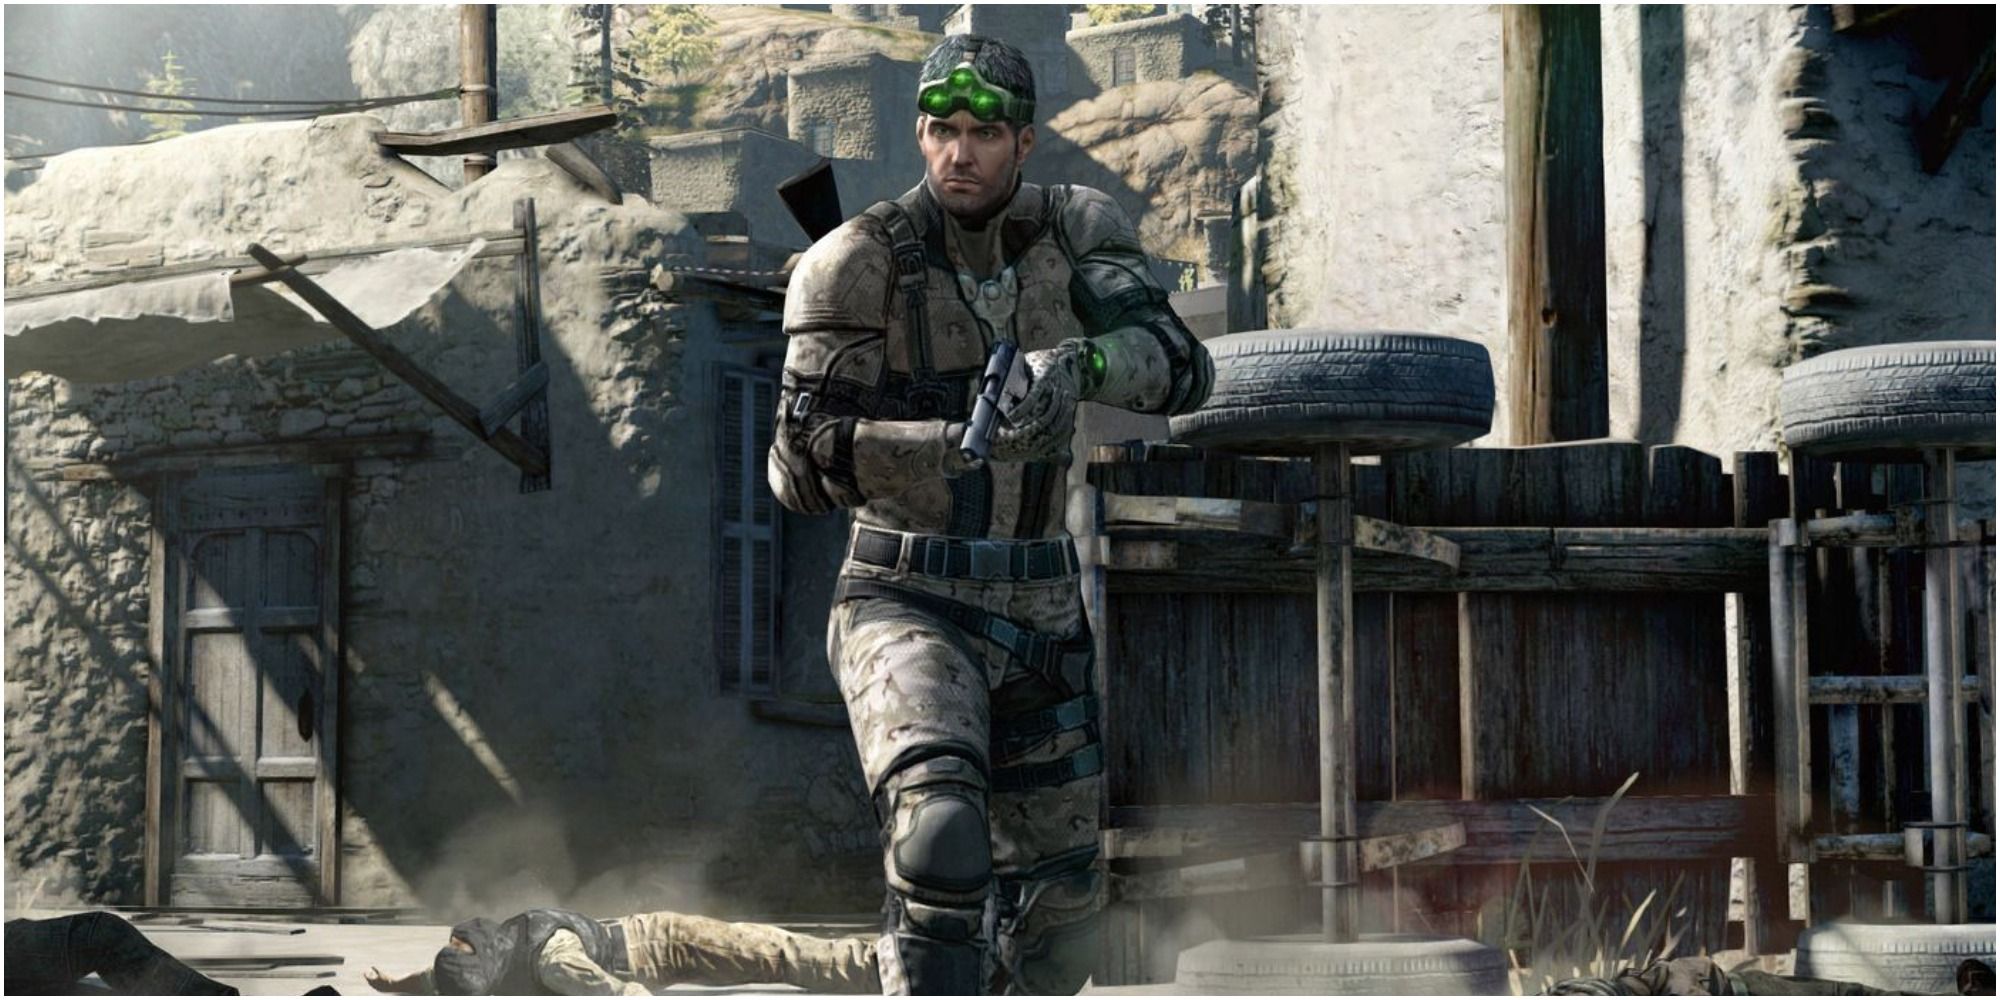 Sam Fisher patrolling the area